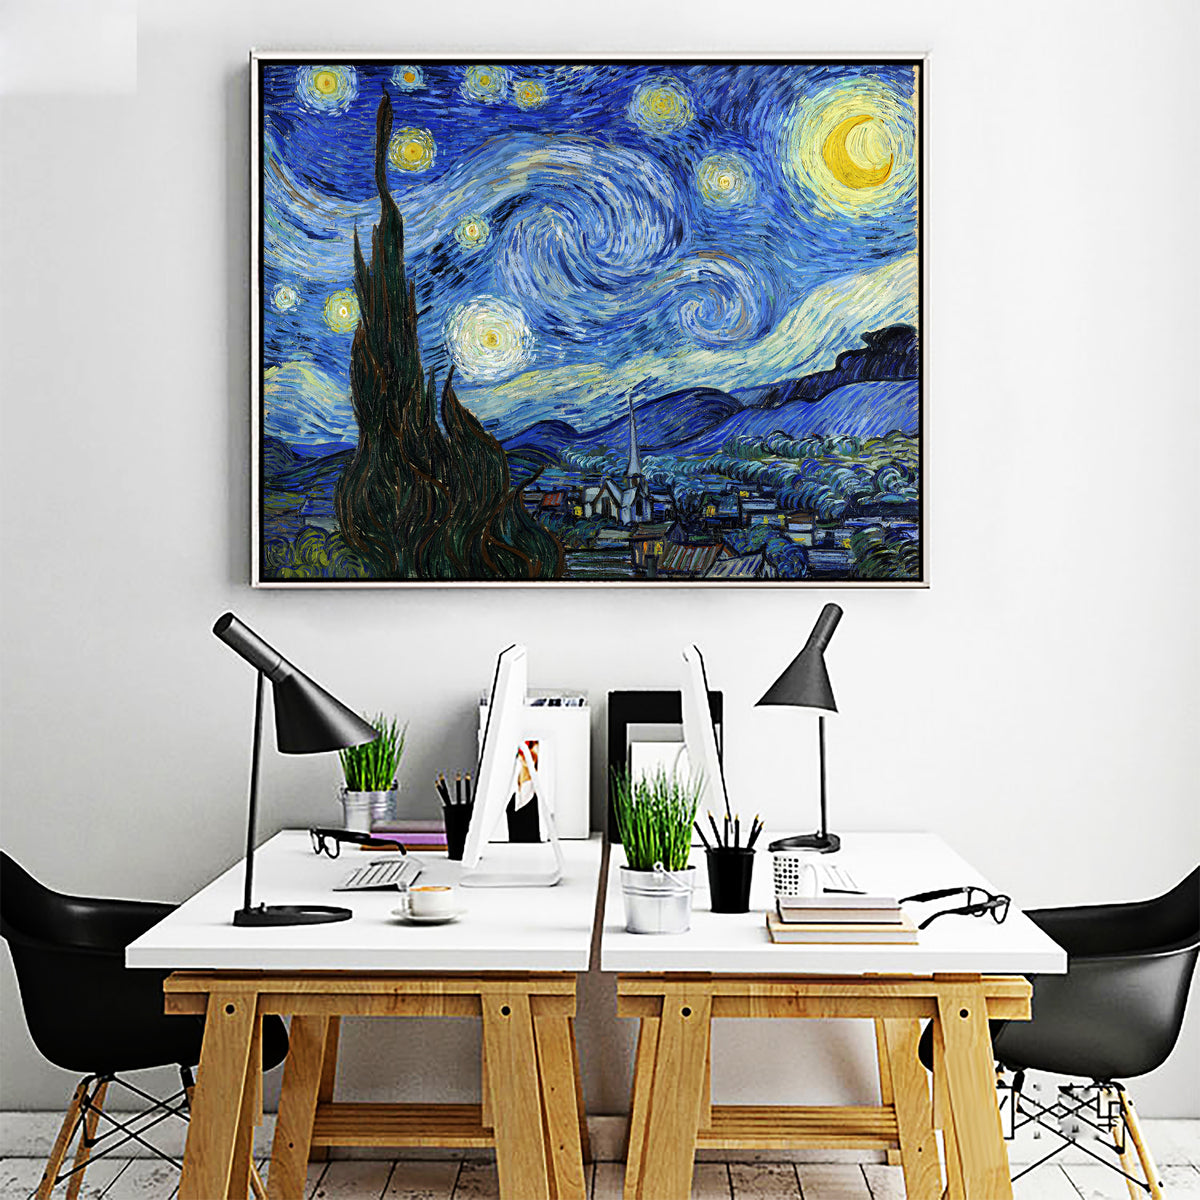 Starry Night by Vincent Van Gogh